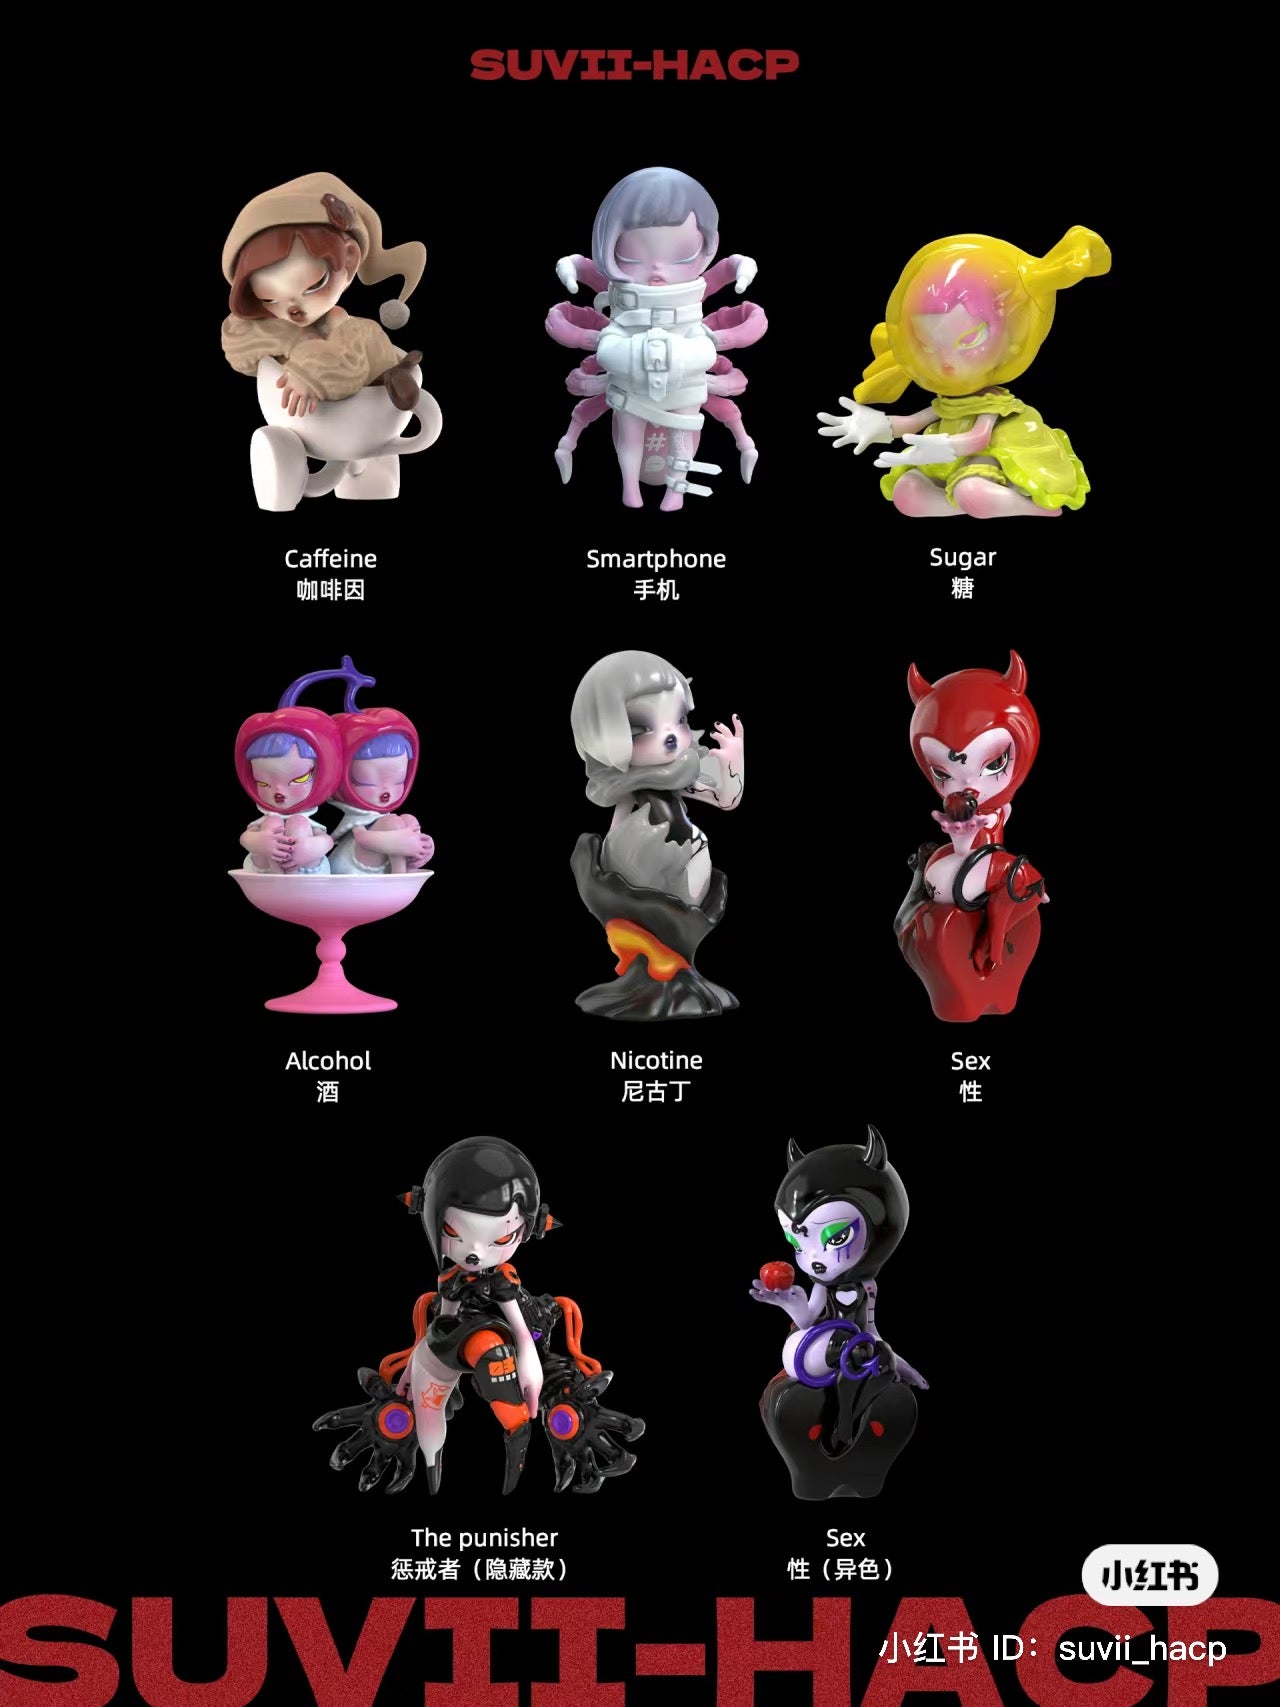 A blind box series featuring cartoon character figurines, including a girl in a cup, a girl toy with purple hair, and a character holding an apple. From Strangecat Toys.